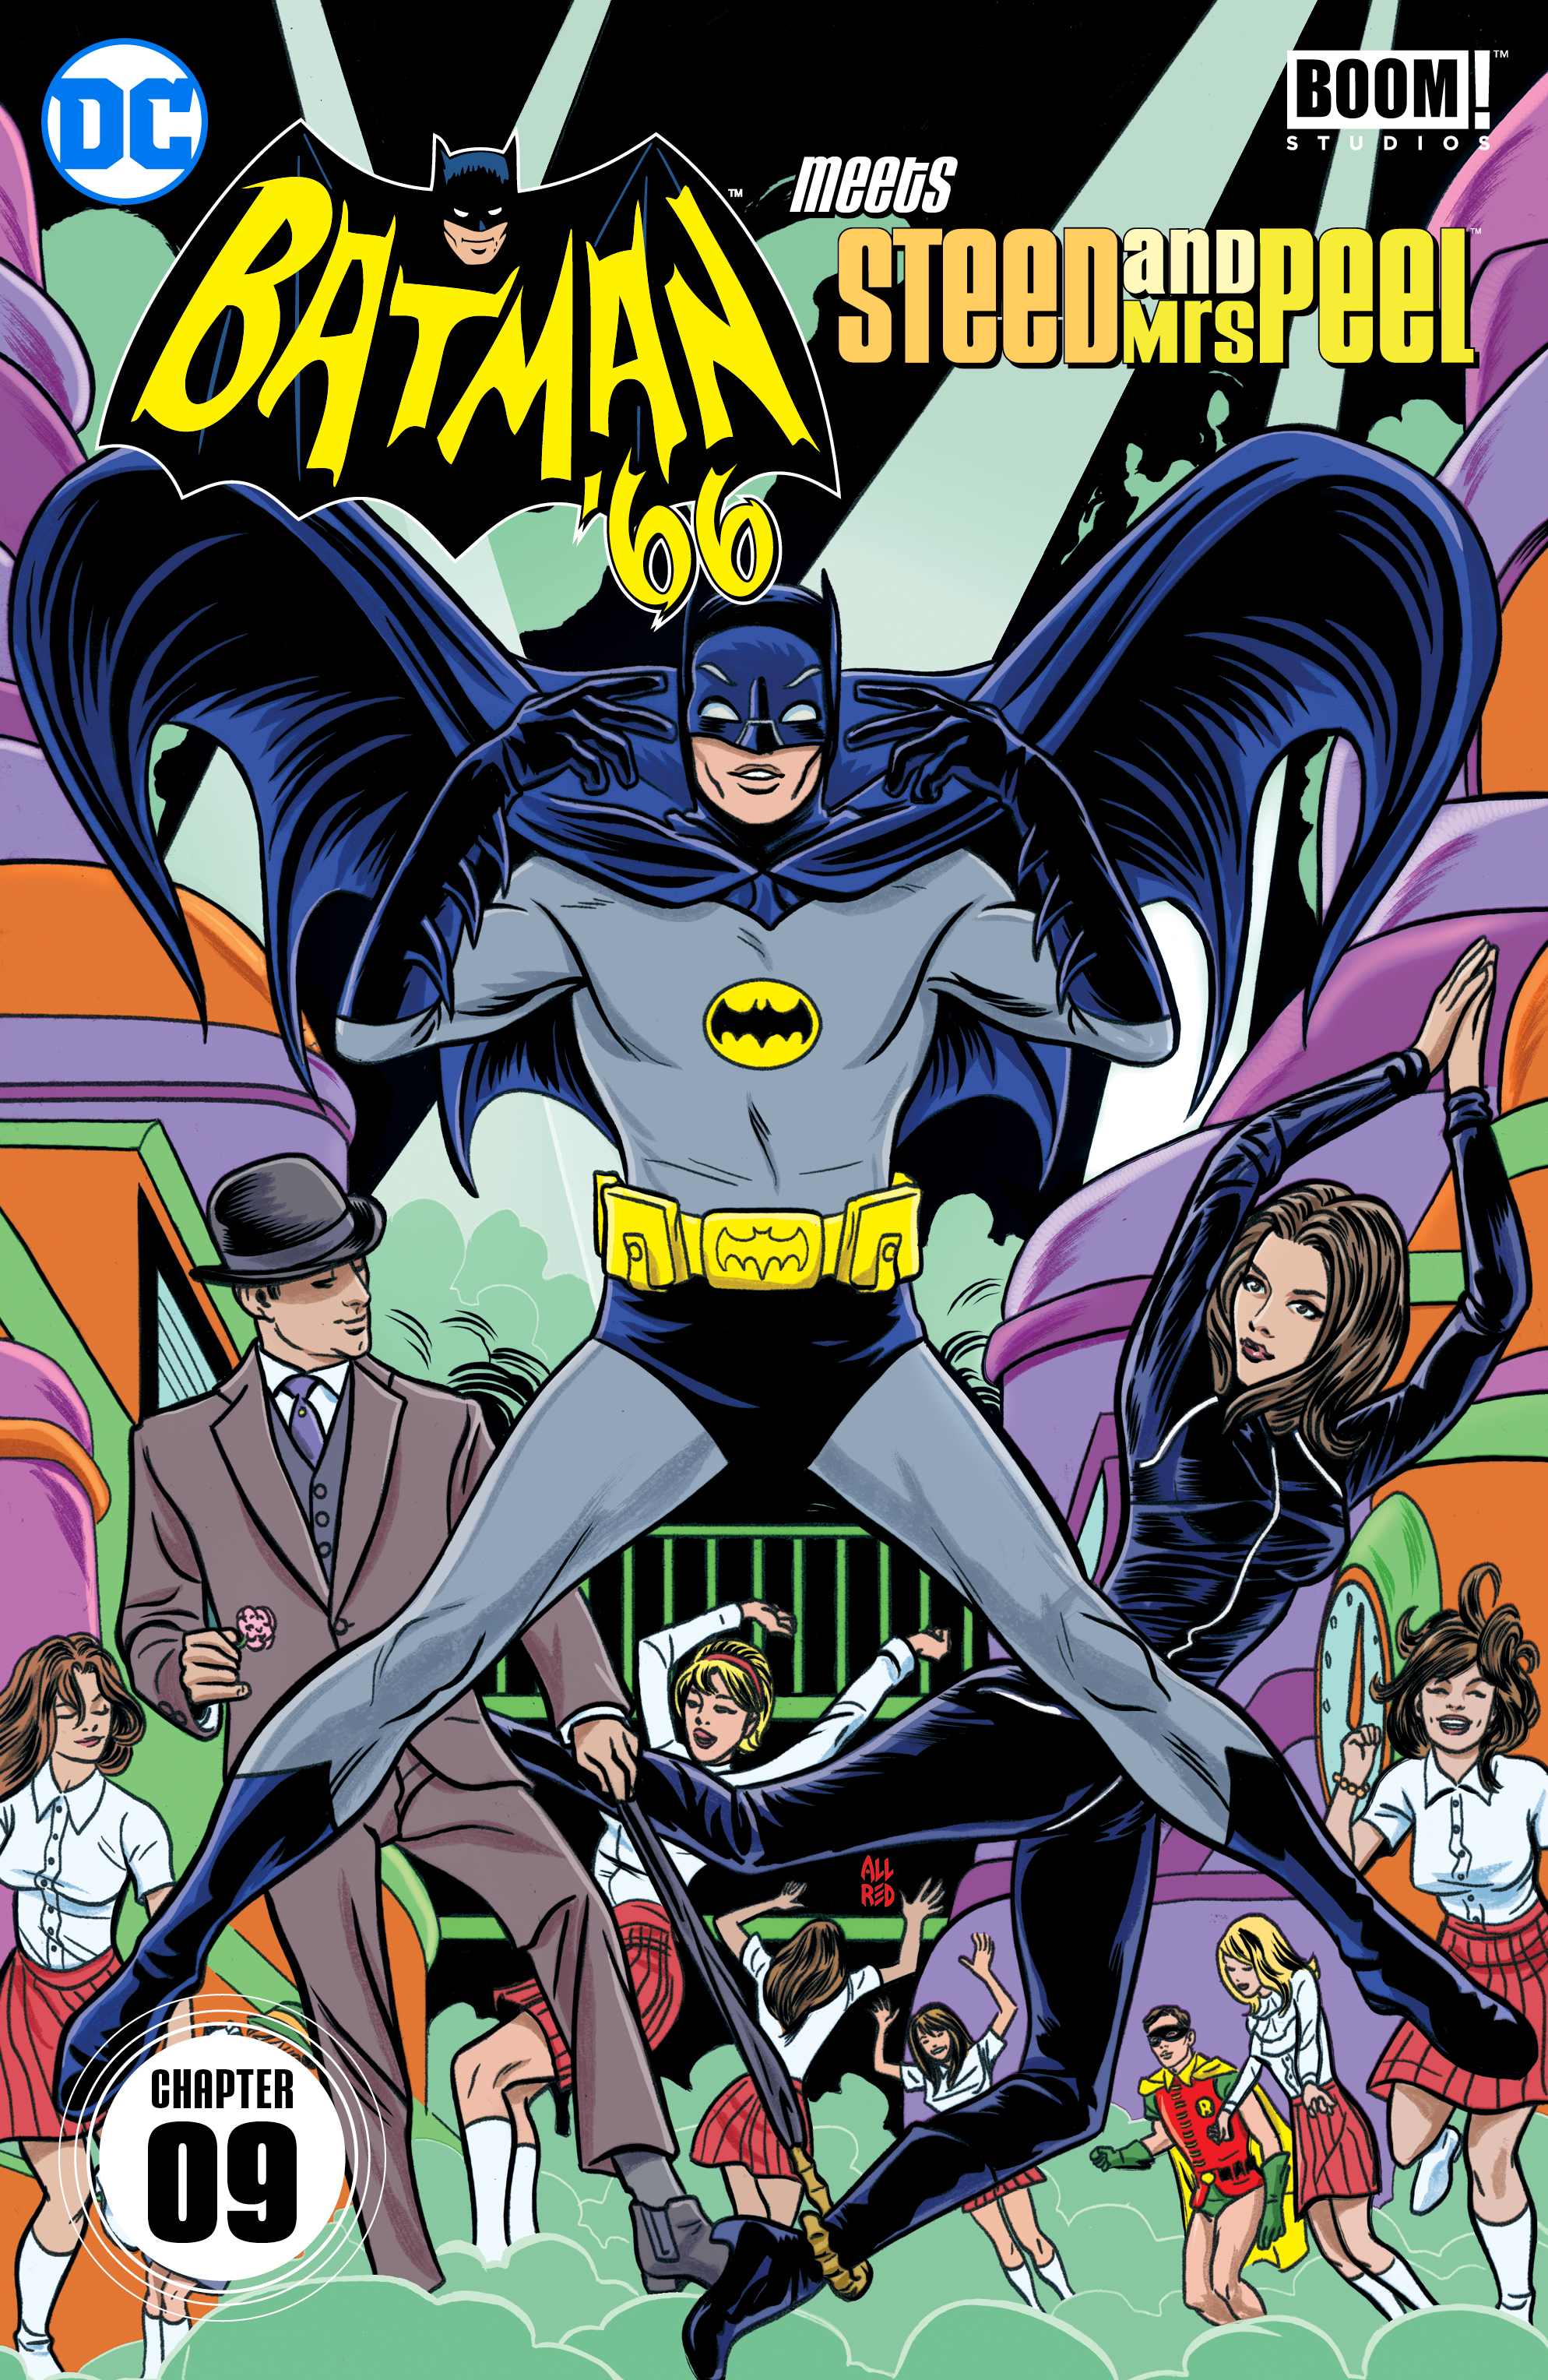 Batman '66 Meets Steed and Mrs Peel #9 preview images